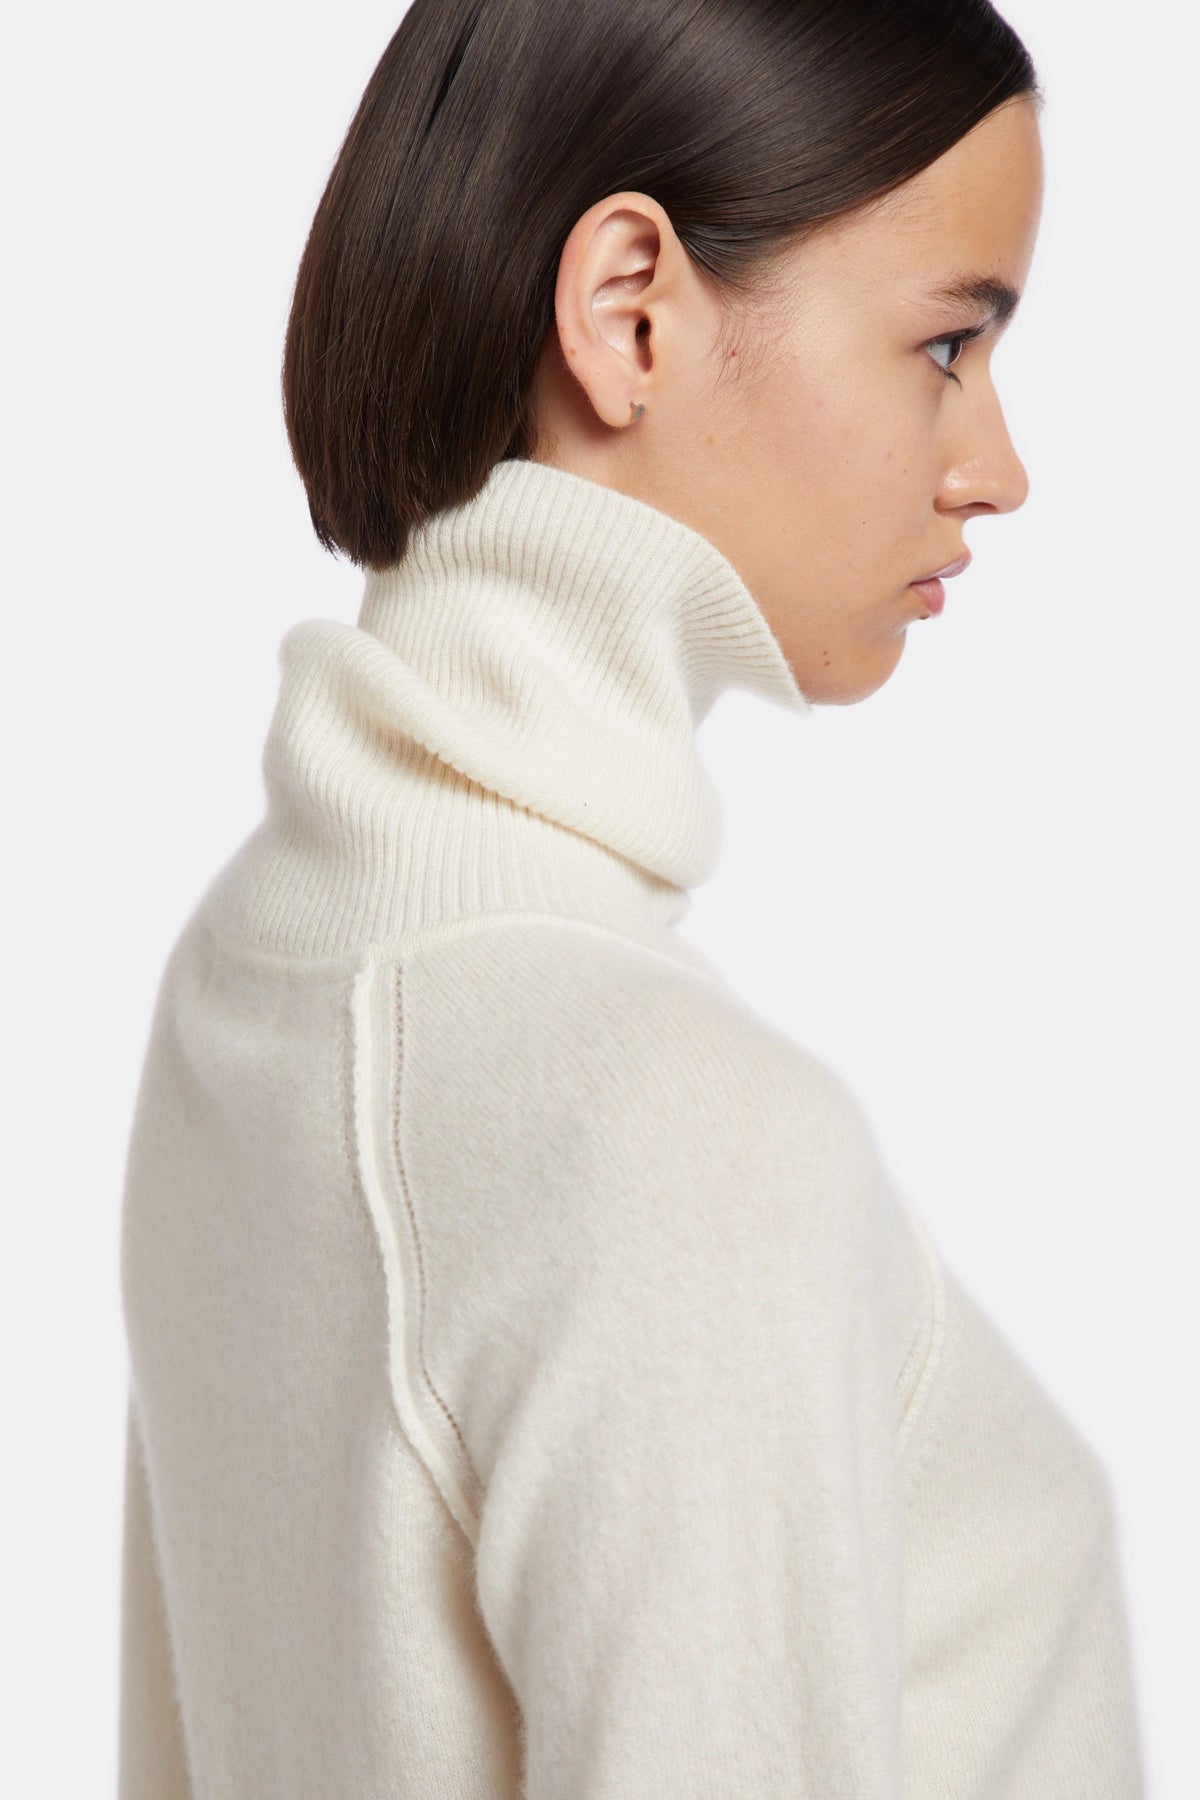 High neck sweater with tears at the bottom and cuffs